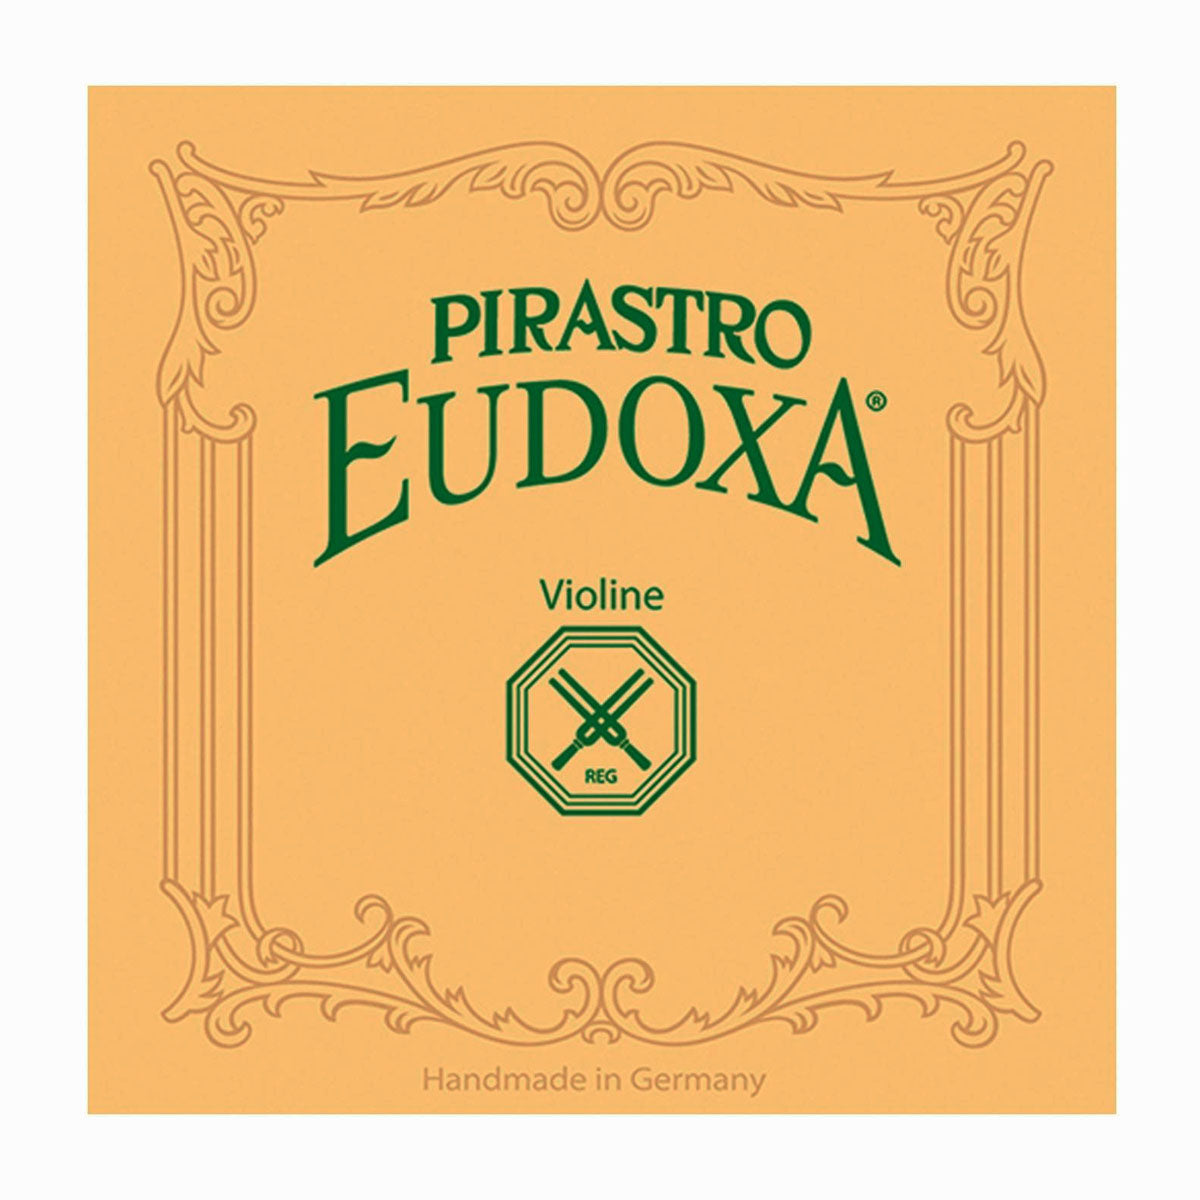 Eudoxa Violin strings, Germany, gut core, full size, 4/4, , hand-picked and inspected by Violins and such, with TEO musical Instruments, London Ontario Canada